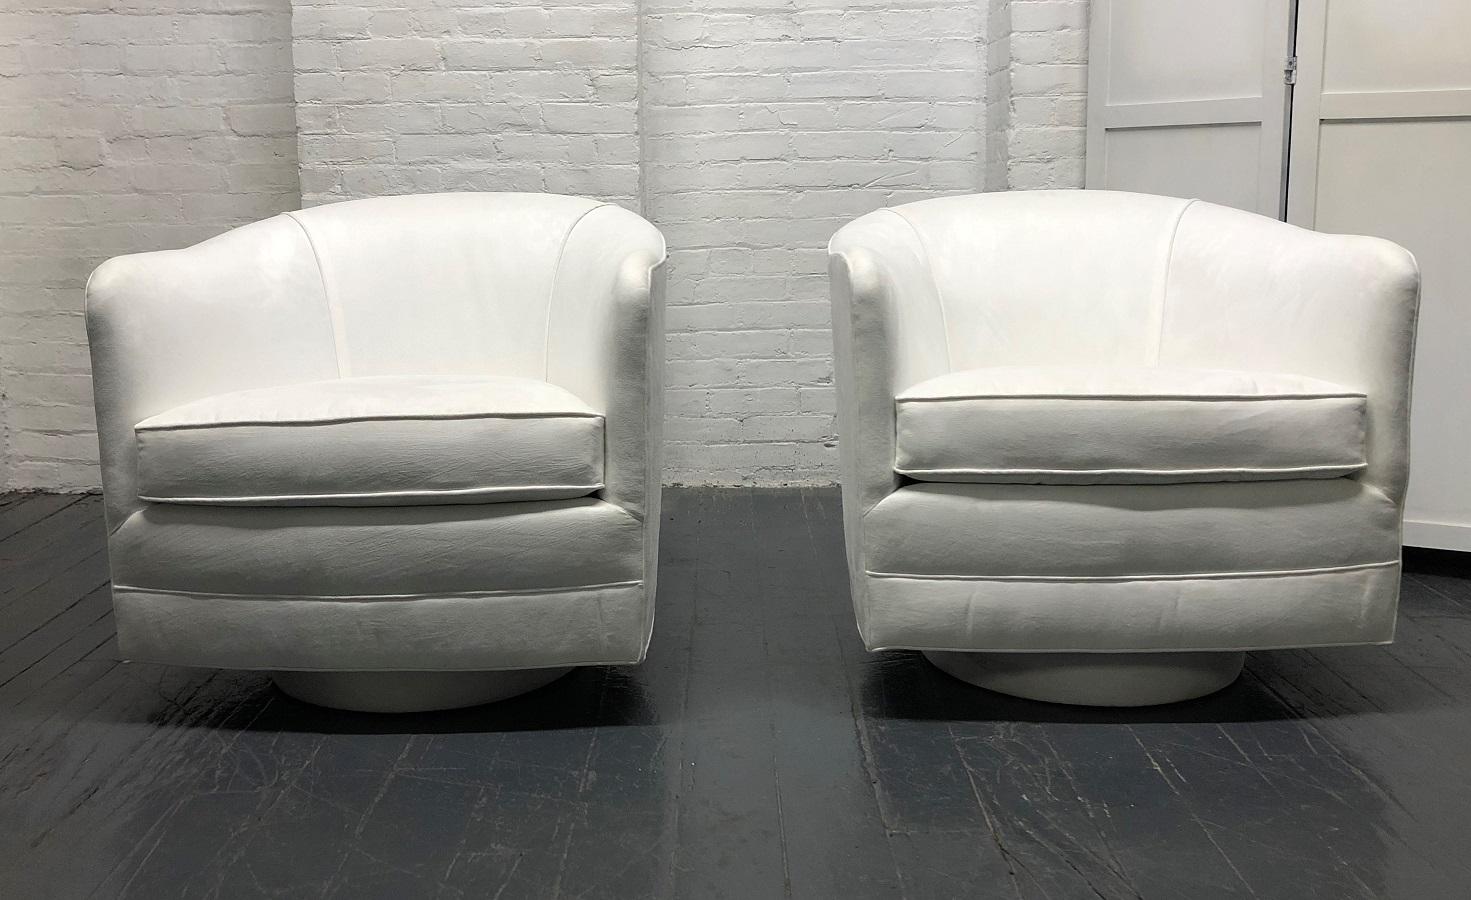 Pair of Milo Baughman style swivel lounge chairs. The chairs swivels 360 degrees. Beautiful pure white ultra suede upholstery.